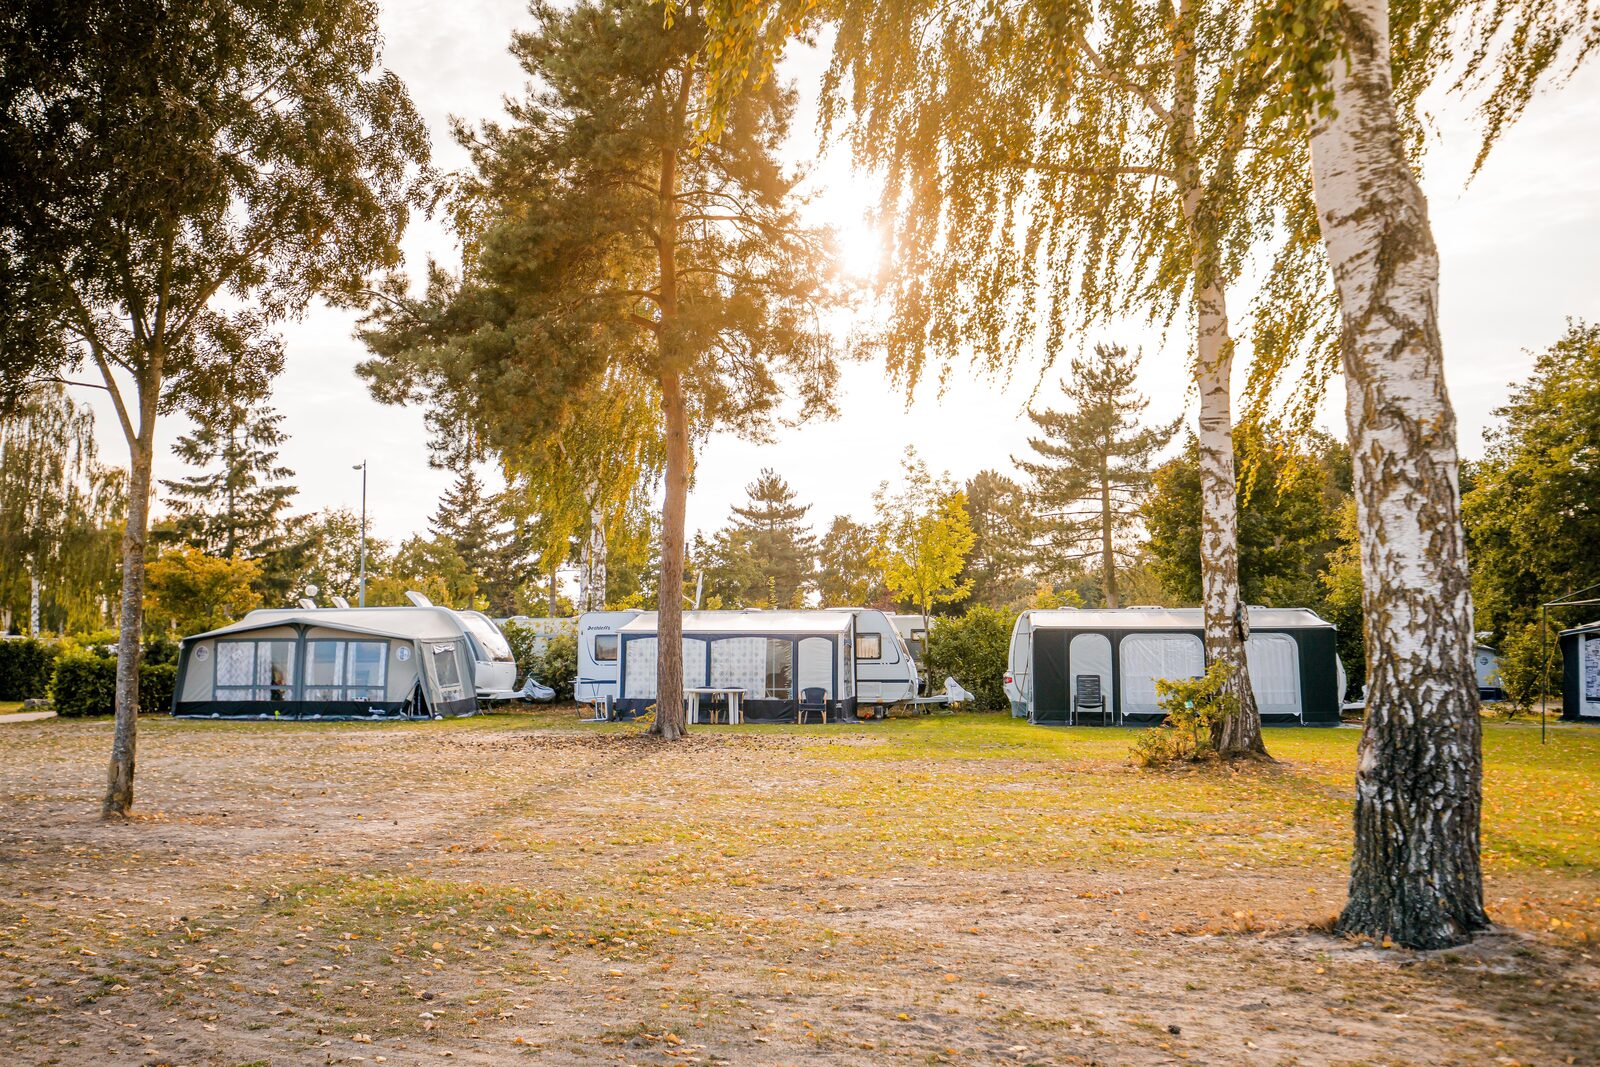 Take a look at our camping pitches